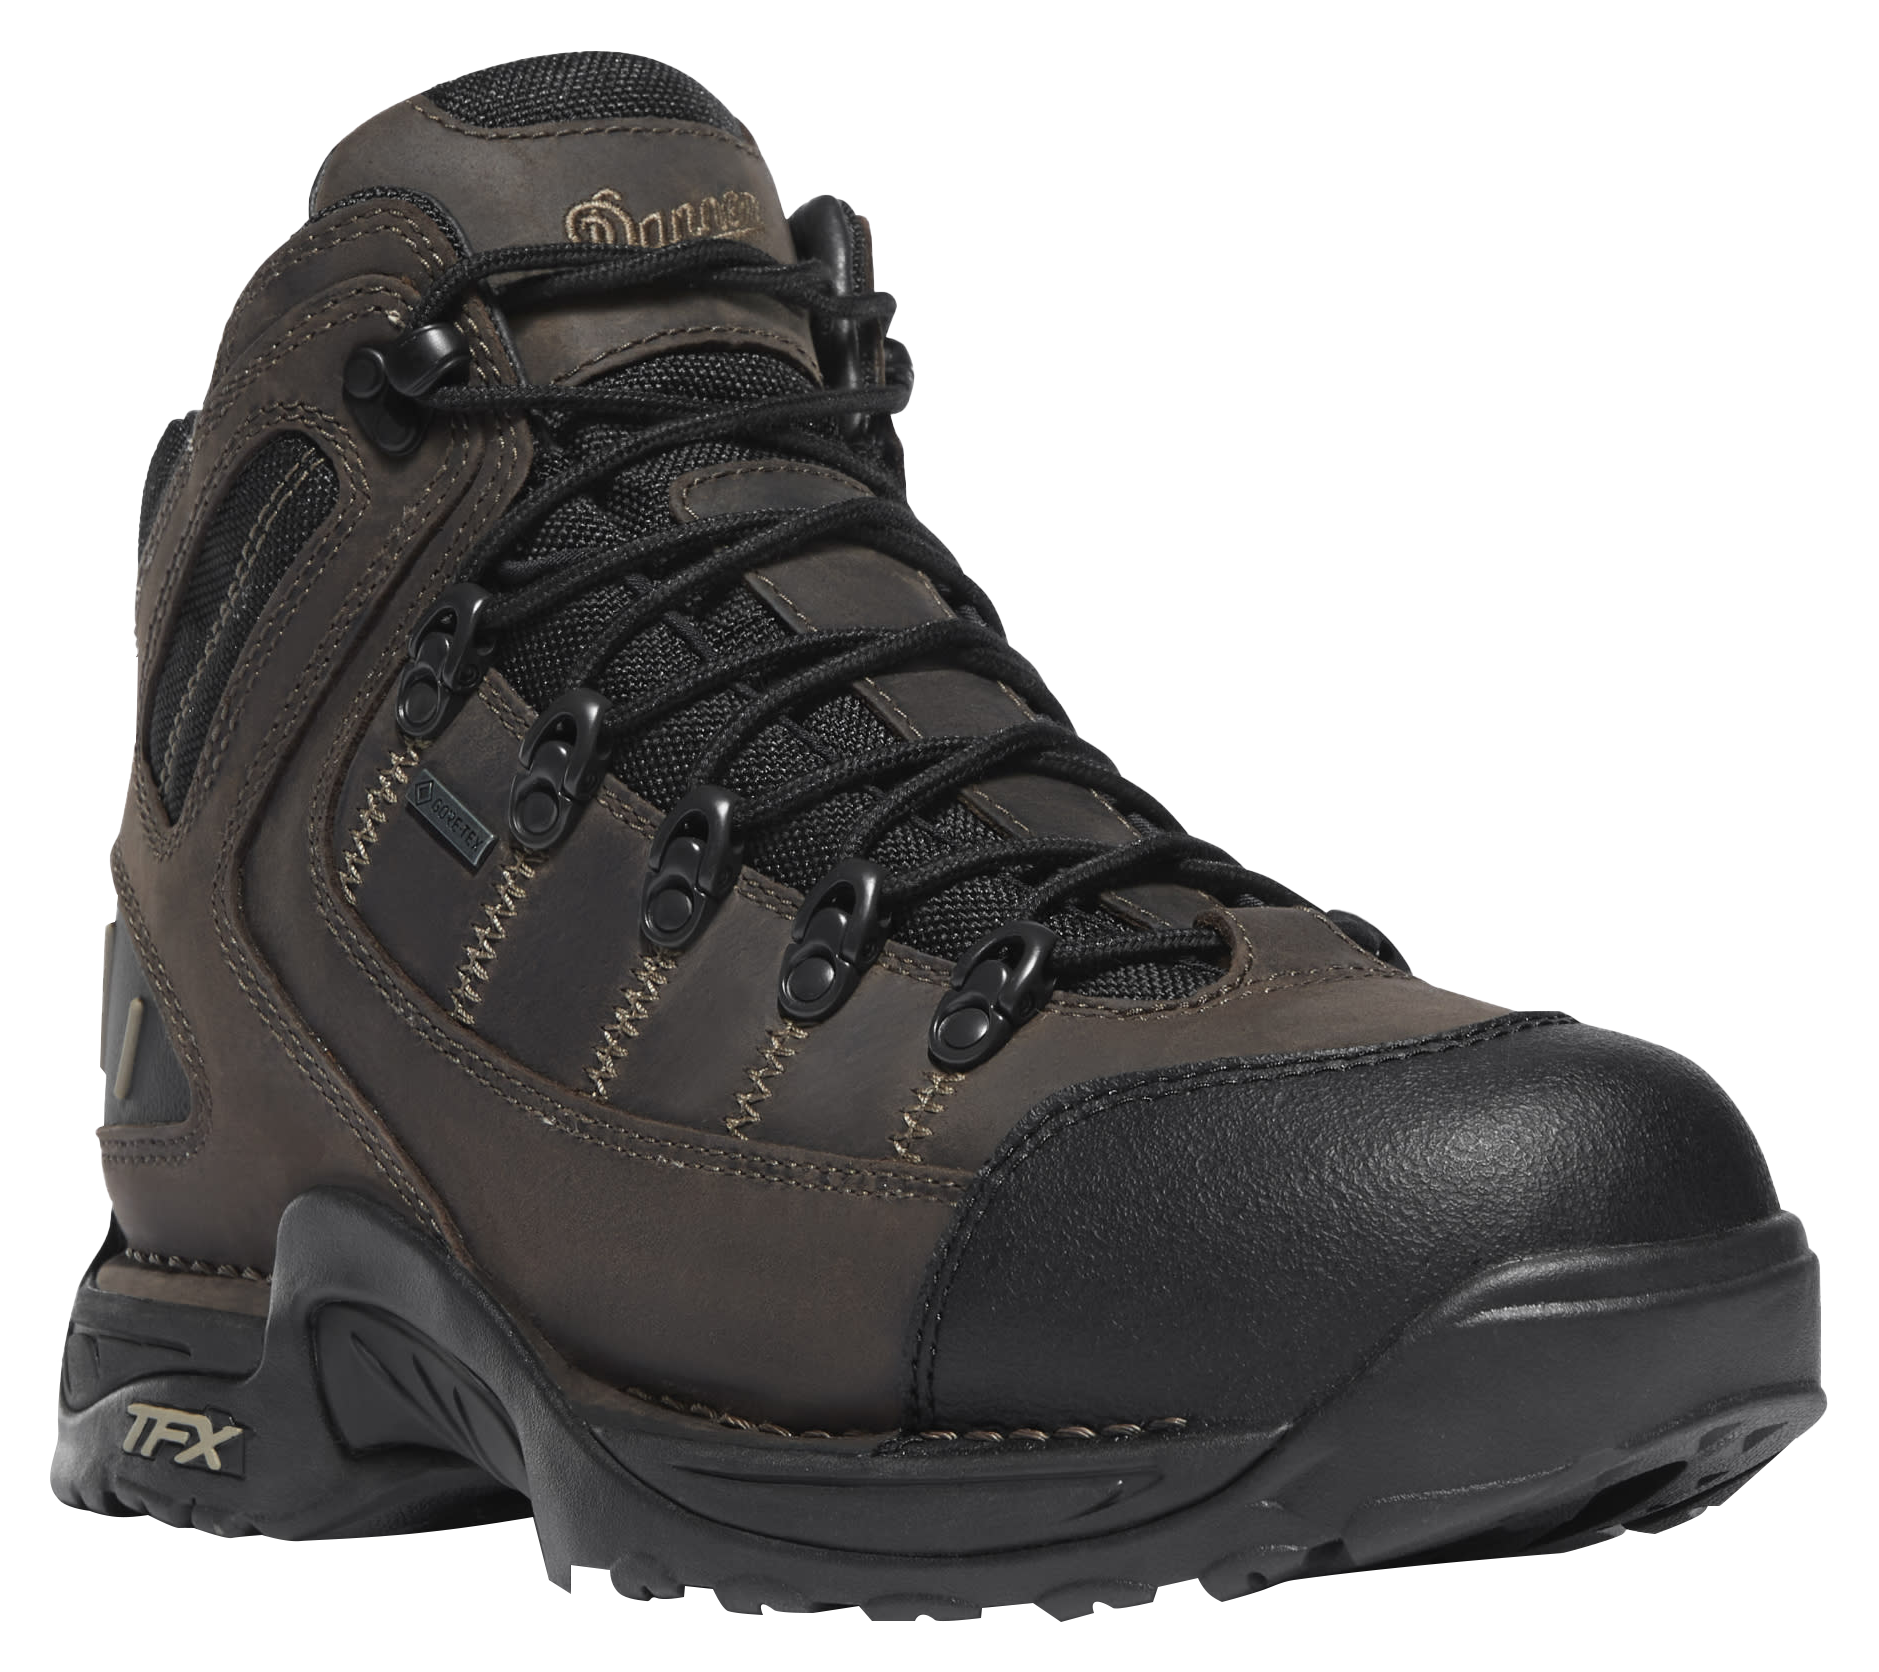 Danner 453 GORE-TEX Waterproof Hiking Boots for Men - Loam Brown/Chocolate Chip - 12M